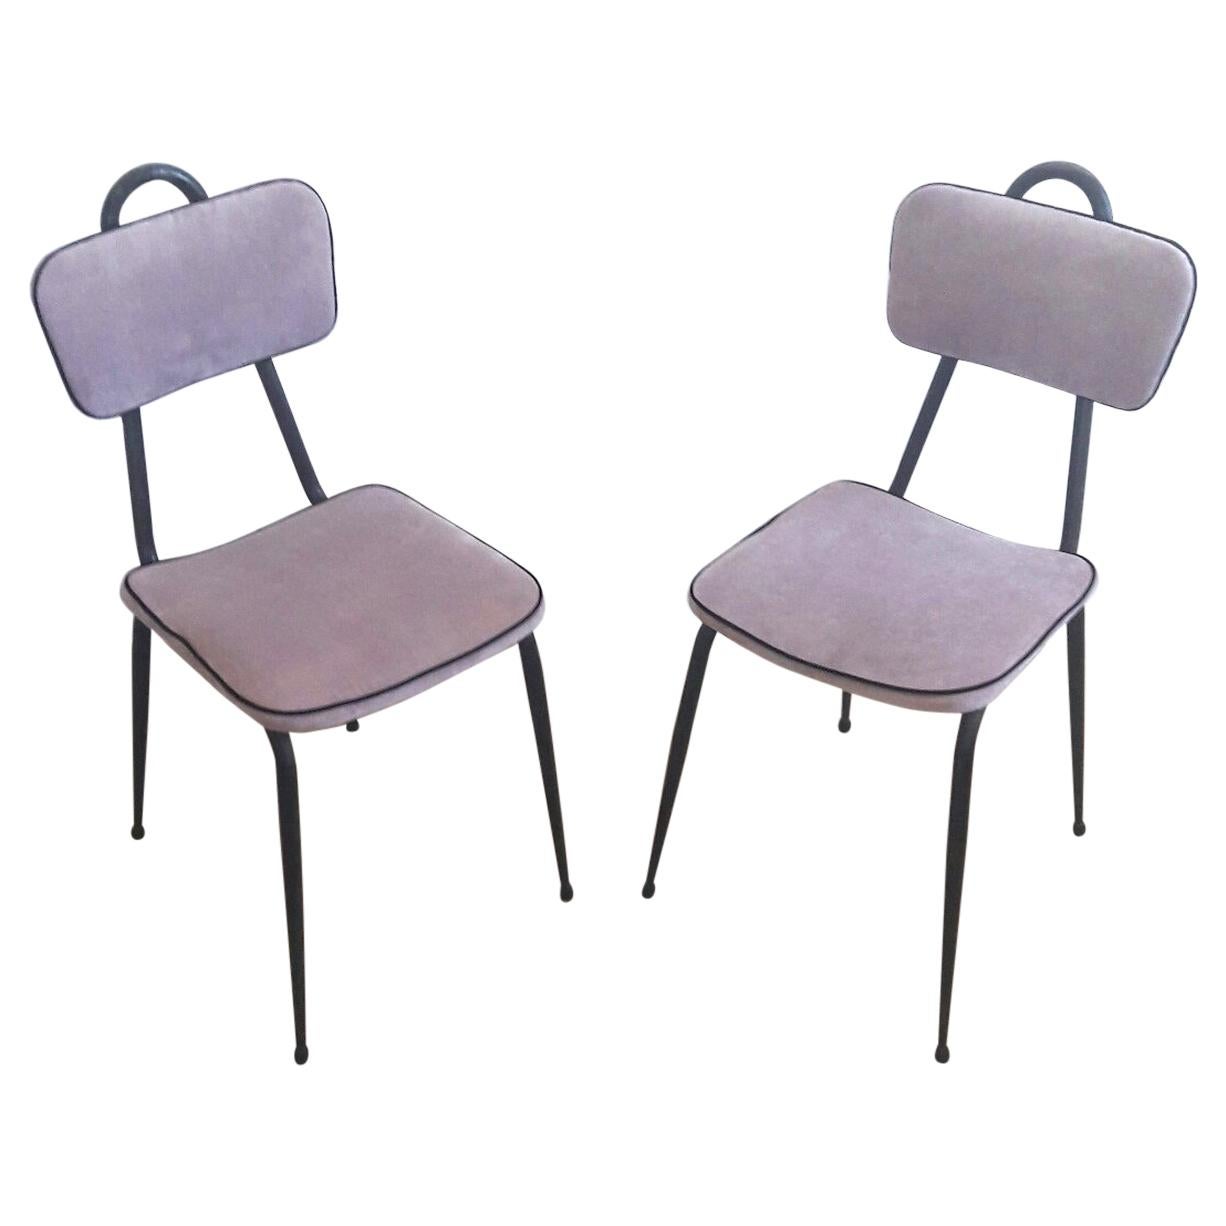 Mid-Century Modern Pair of Dark Metal and Lilac Velvet Chairs, 1950s For Sale